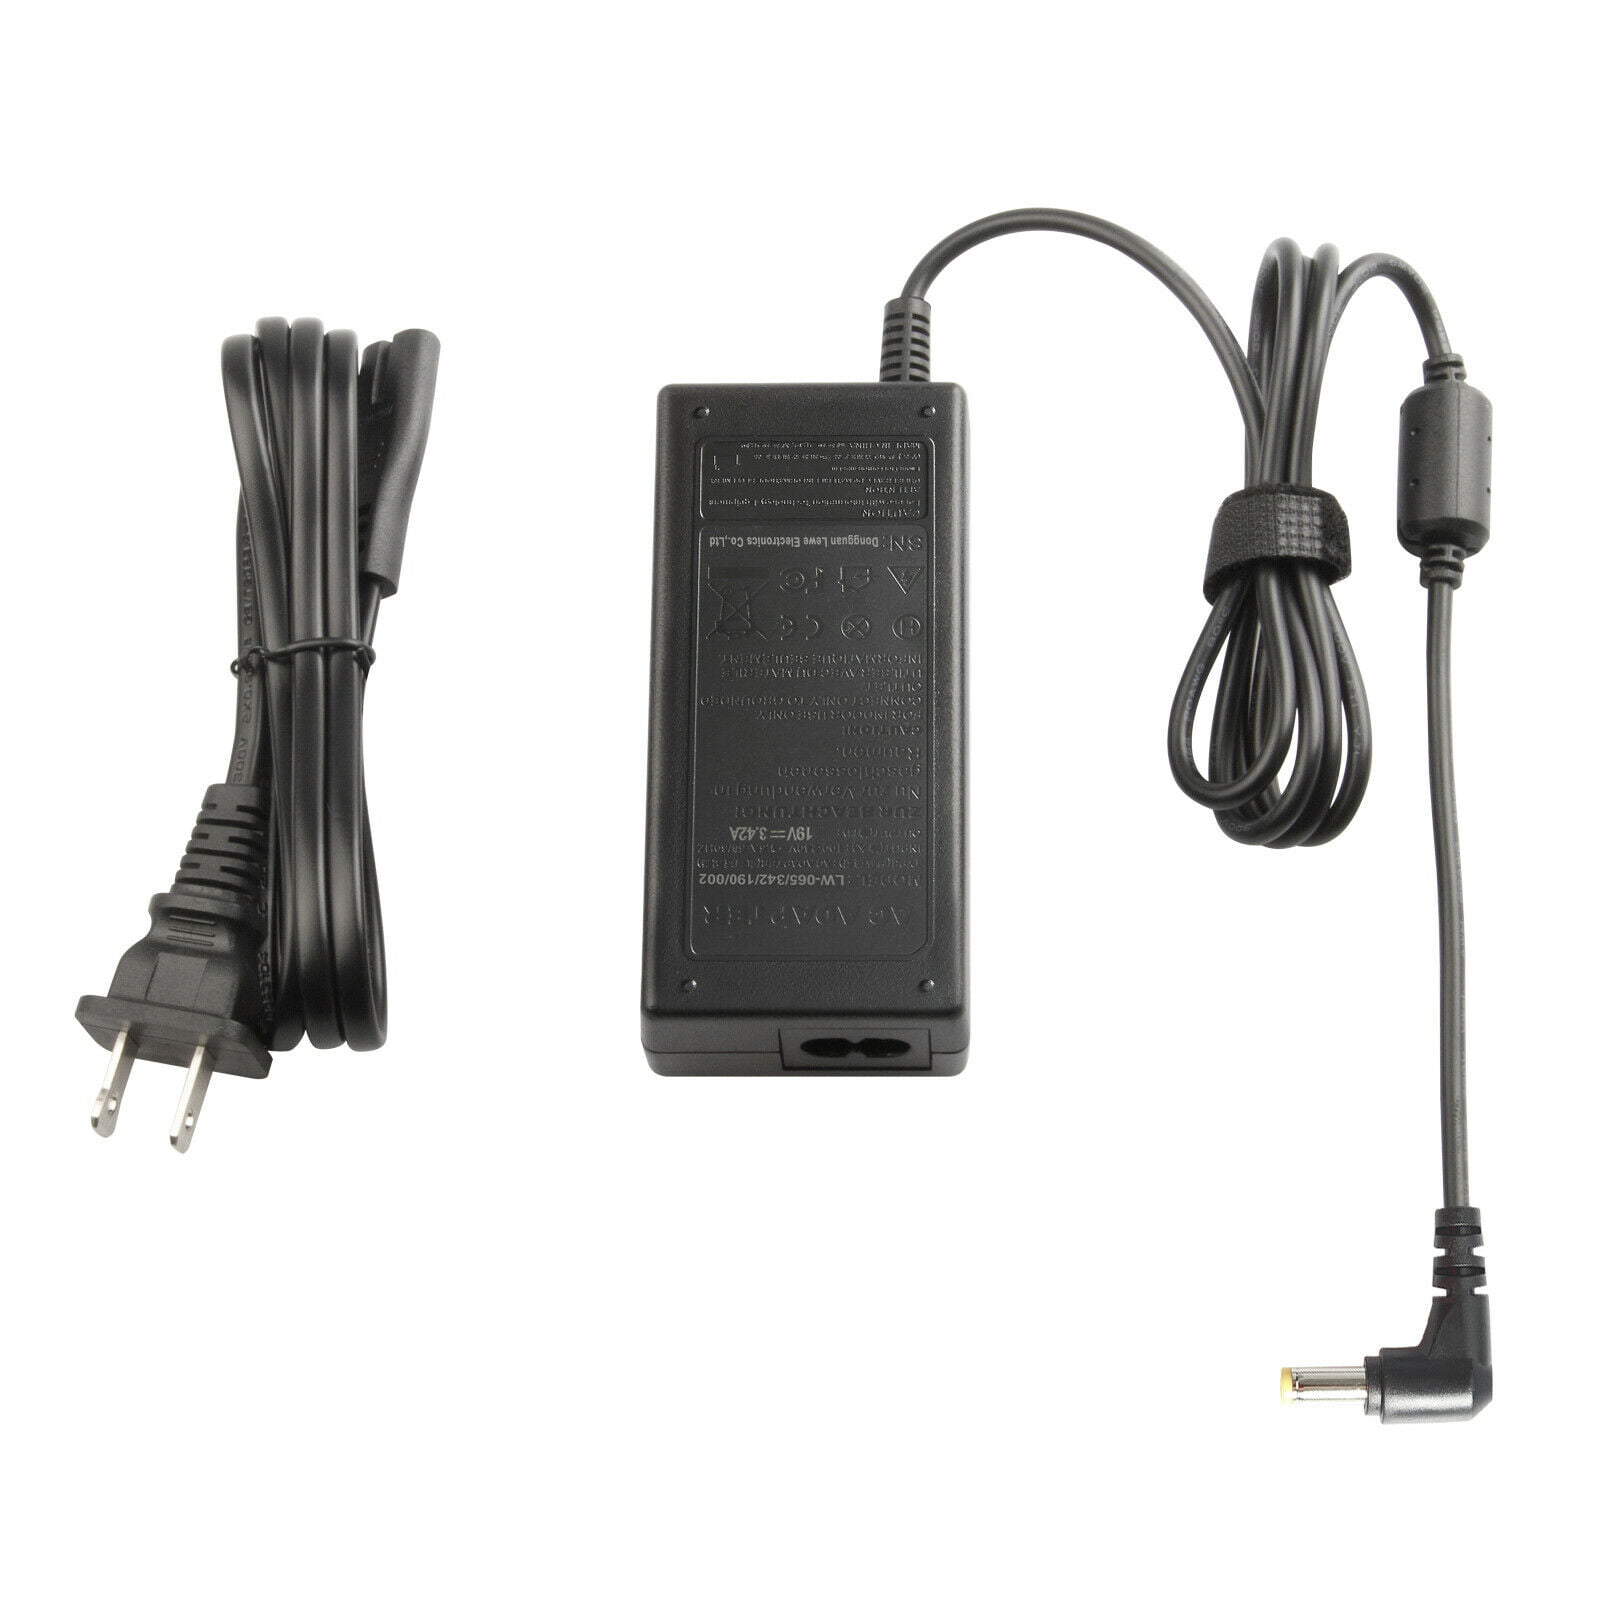 19V 3.42A 65W AC/DC Adapter Battery Charger For Toshiba Satellite C55 C55D C55T 